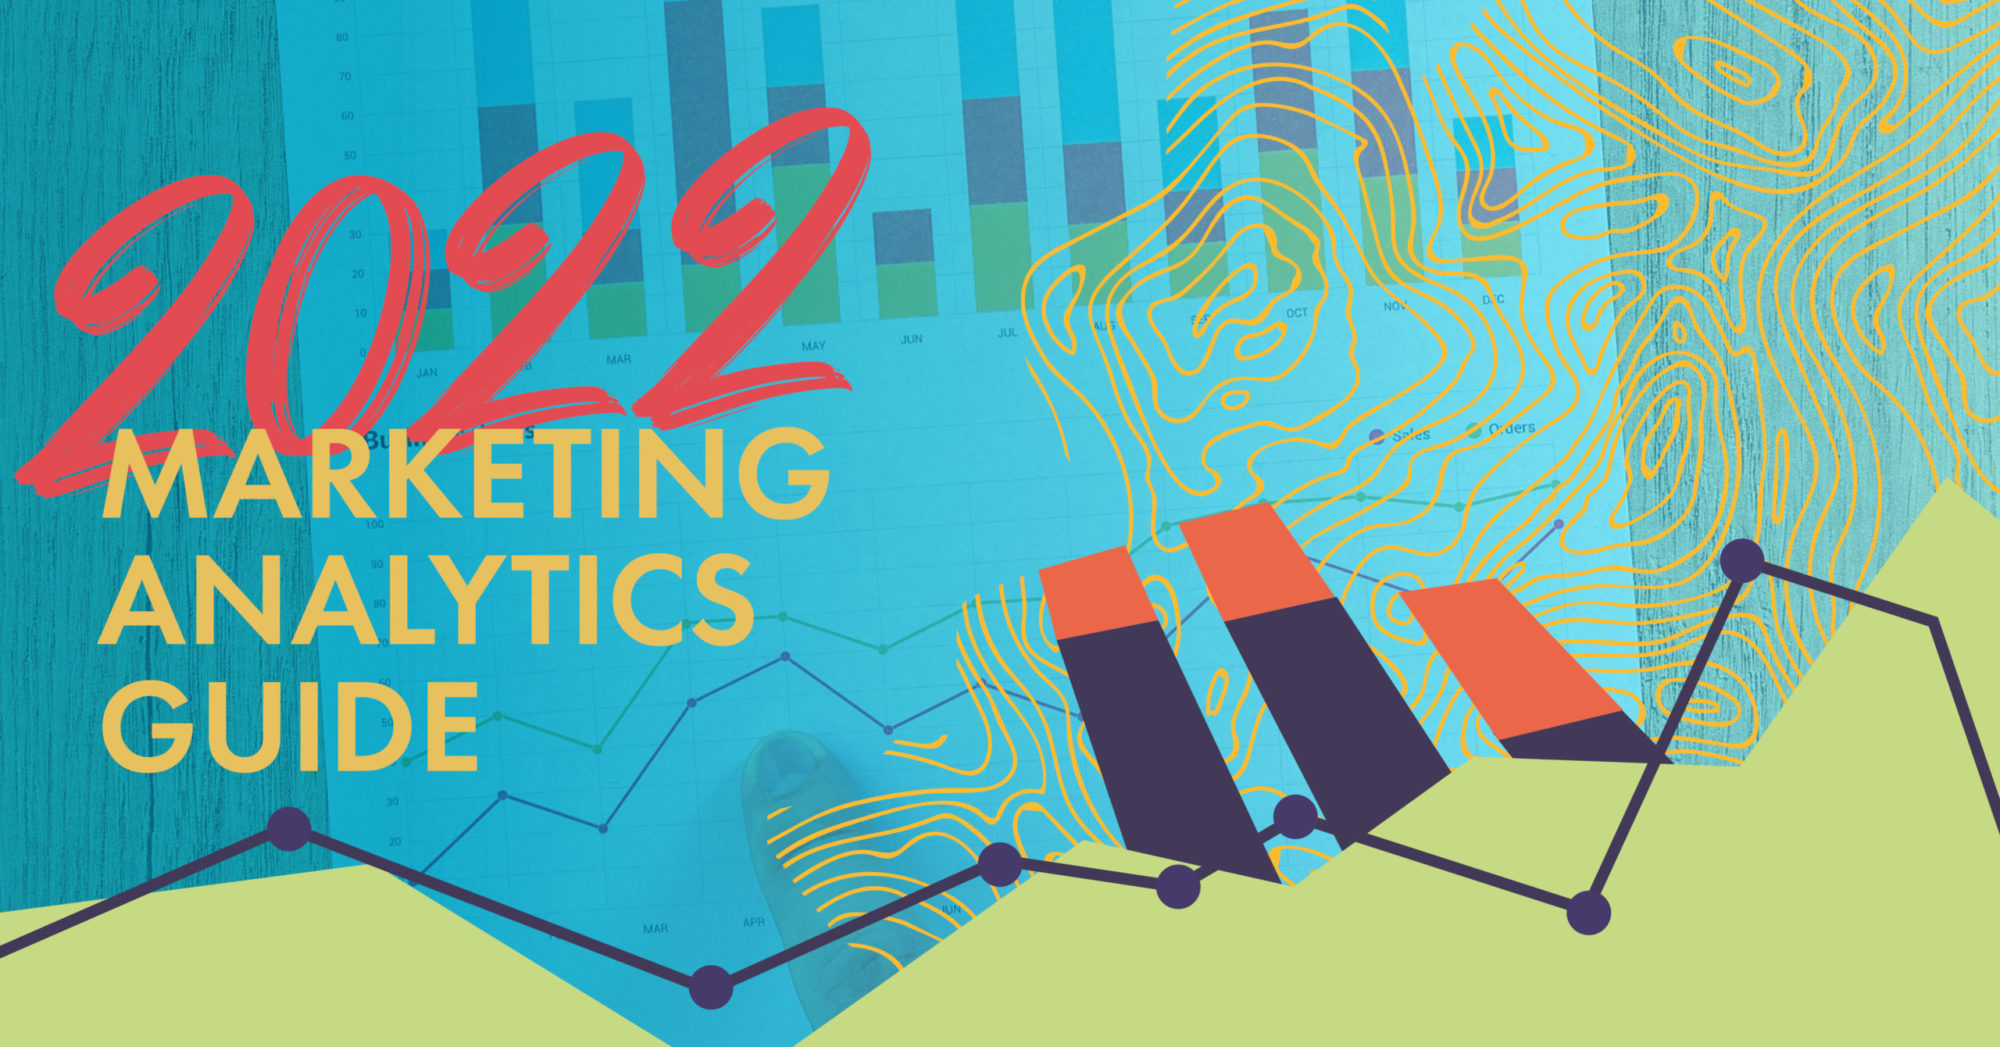 Your 2022 Marketing Analytics Guide